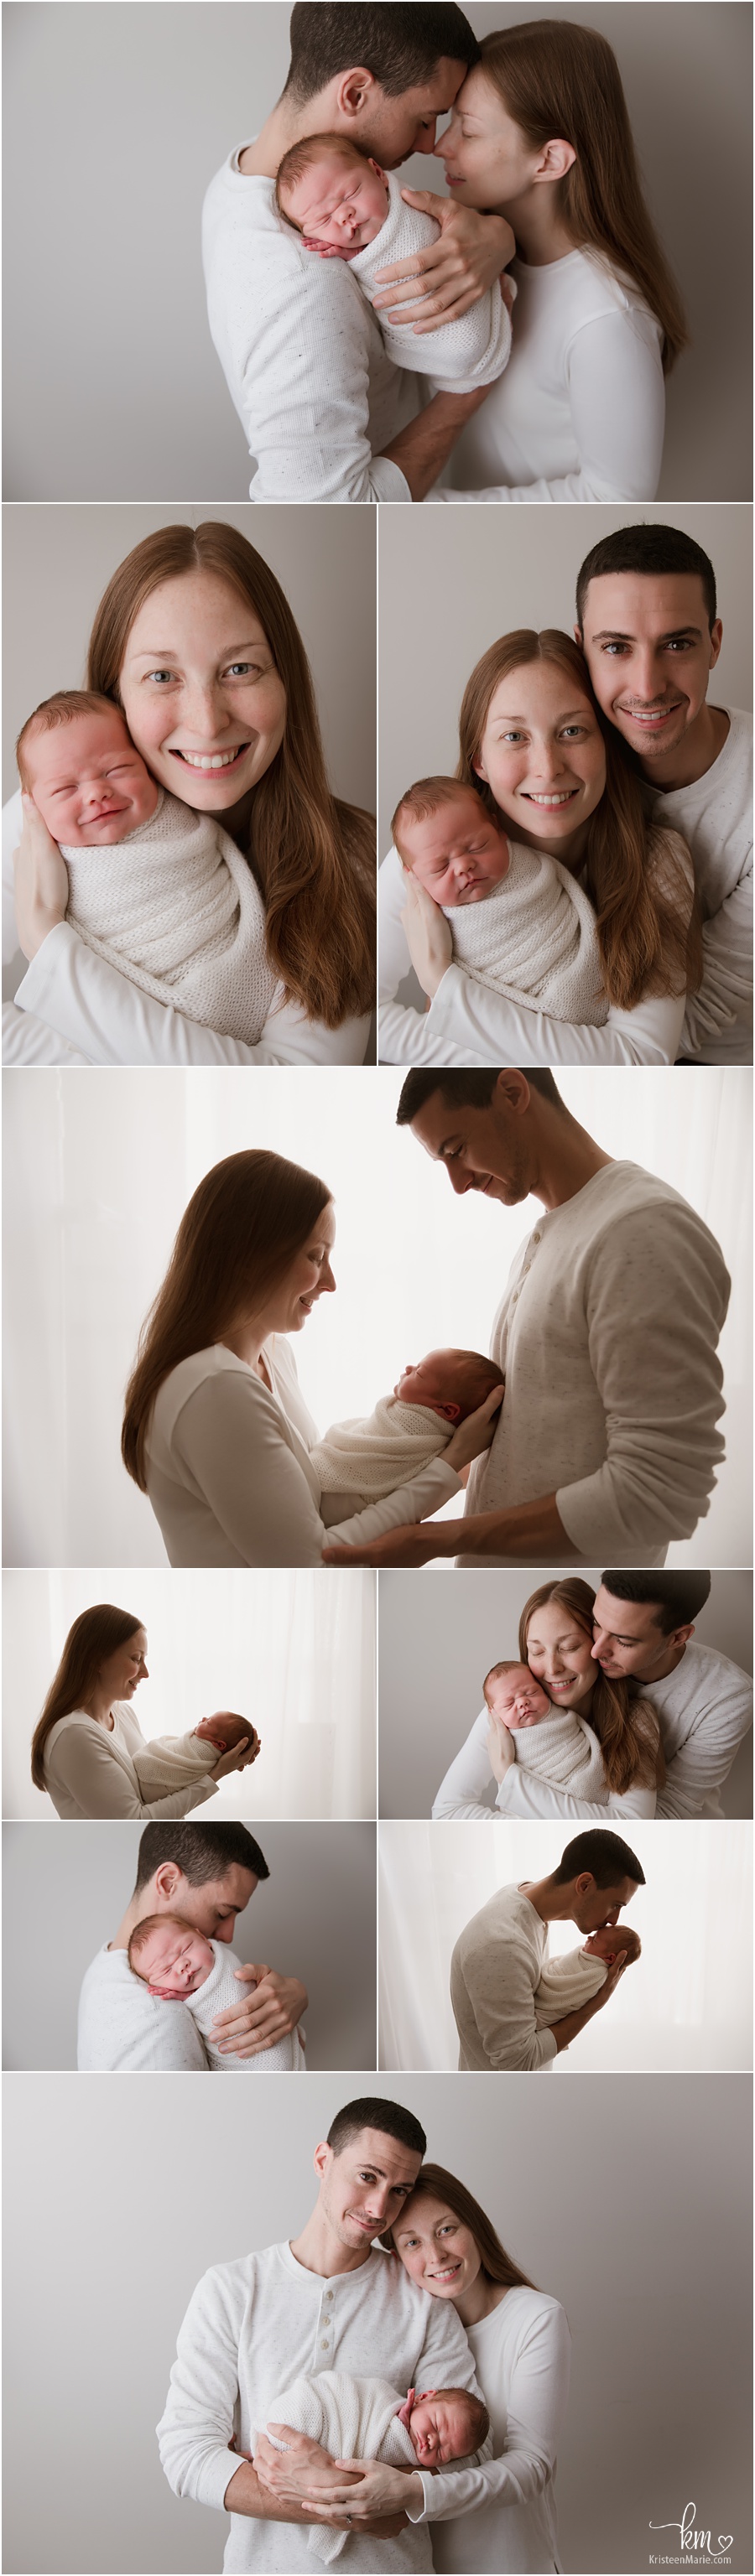 family pictures with newborn baby - red head baby and mom